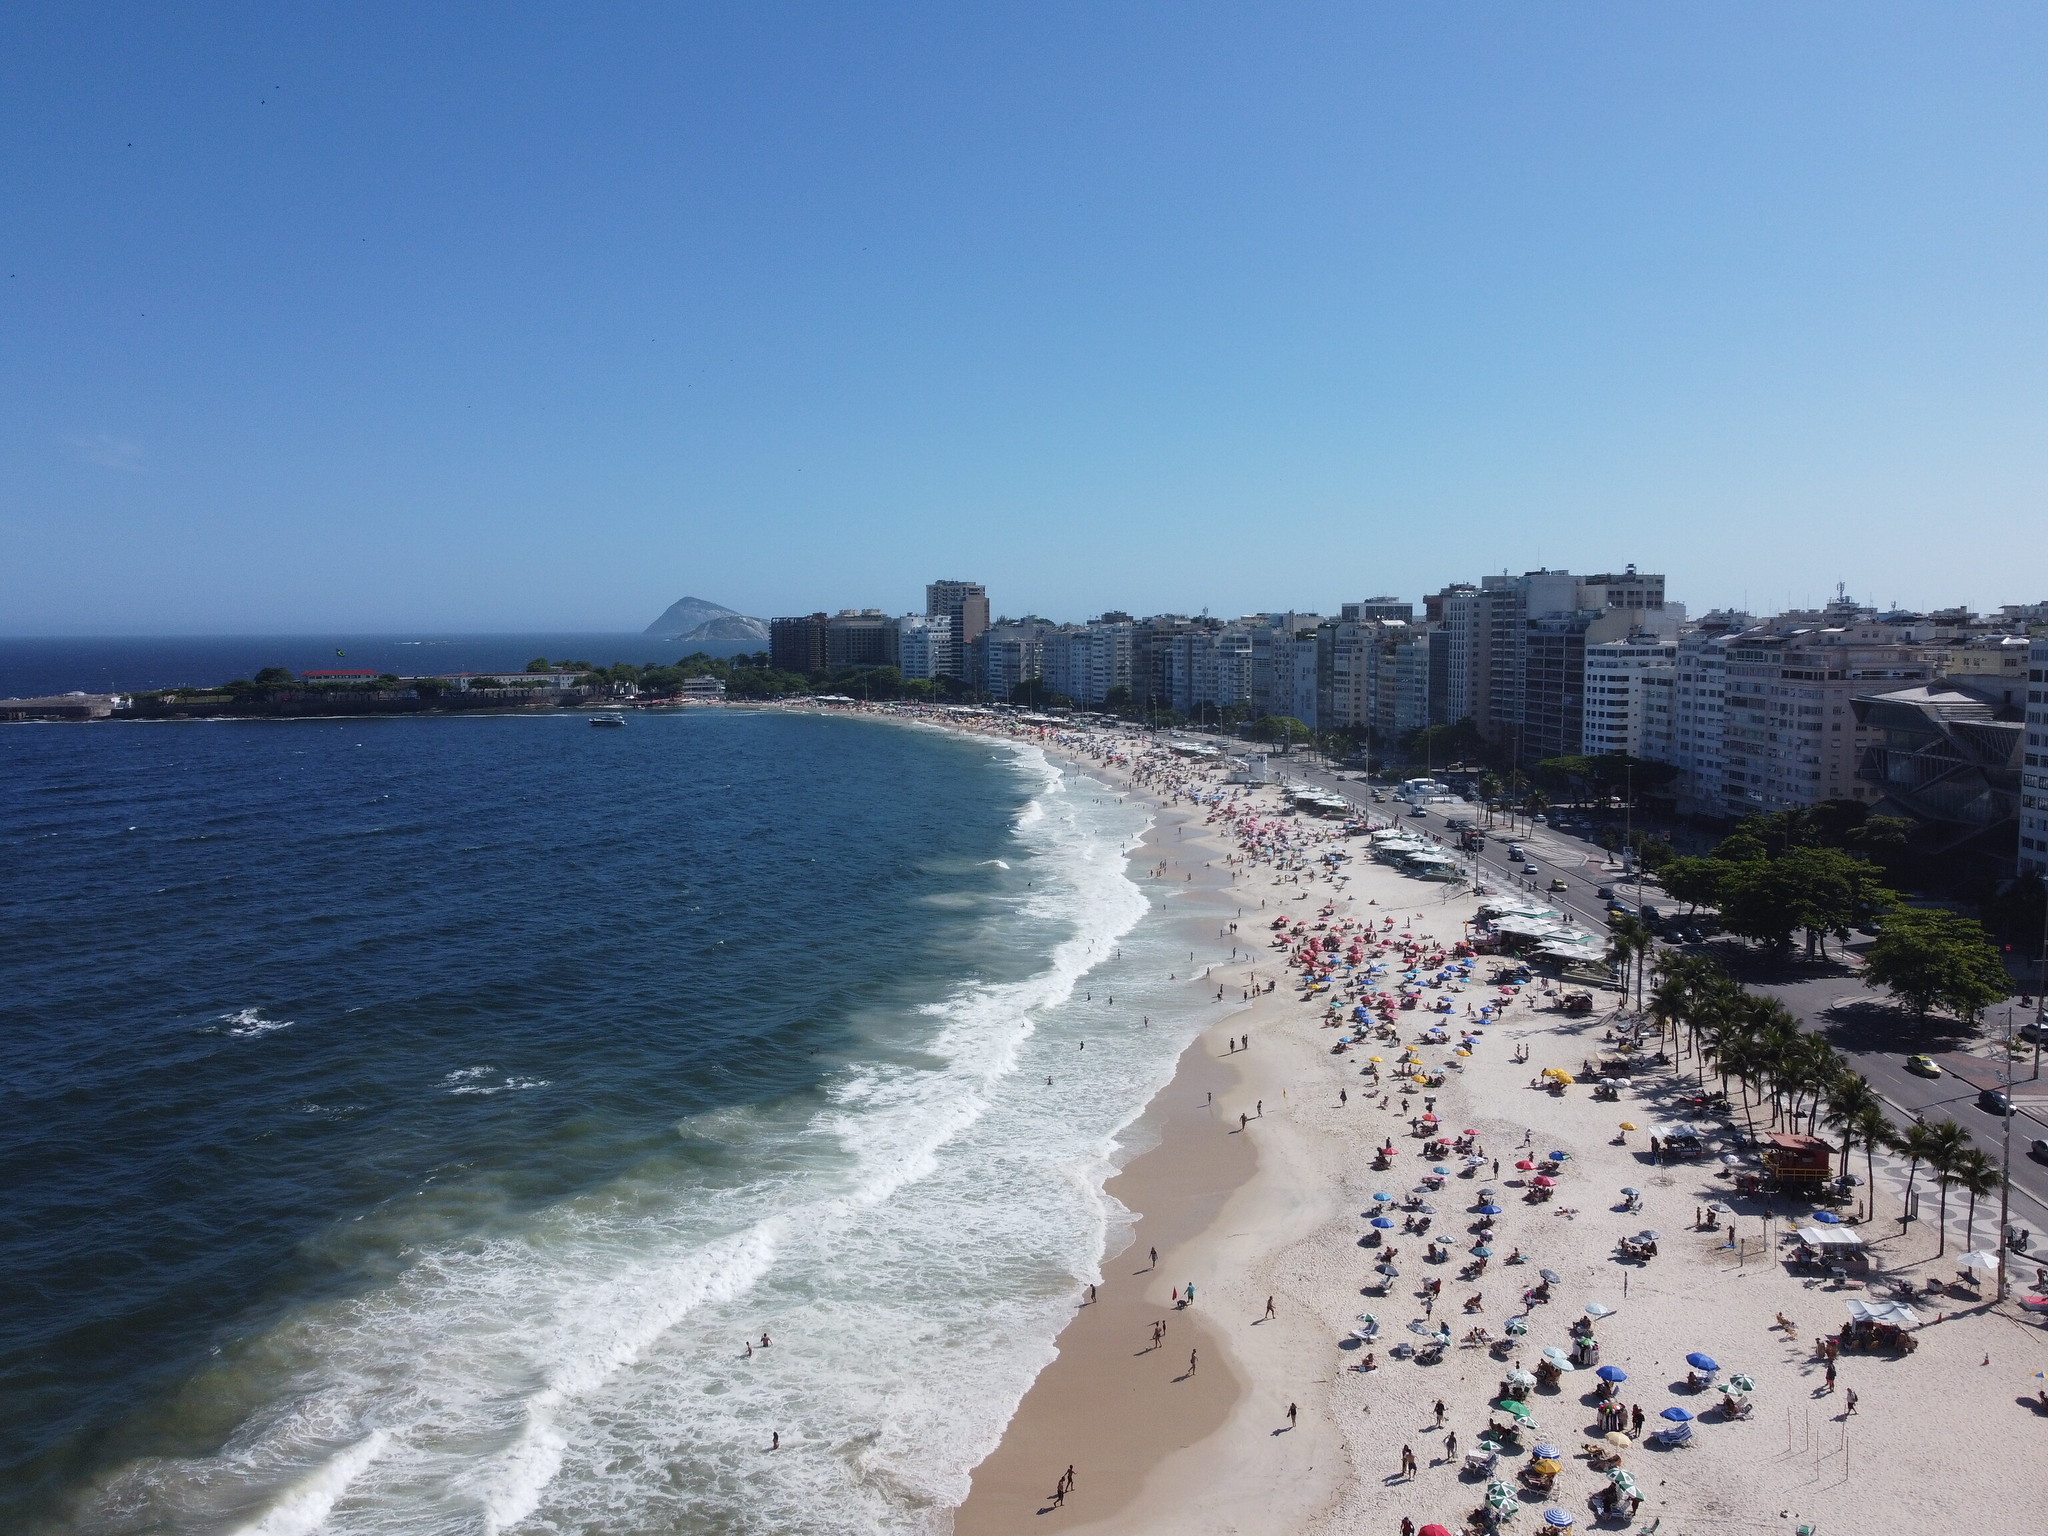 An aerial view of Copacabana beach. A wide strip of sand curves along a bay. The beach is busy with people, but not crowded. To the left of the sand is the sea, with waves lapping the sand. To the right of the sand is a road and, on the other side of the road, a row of multistory buildings. Image: Rafael Catarcione/Riotur.